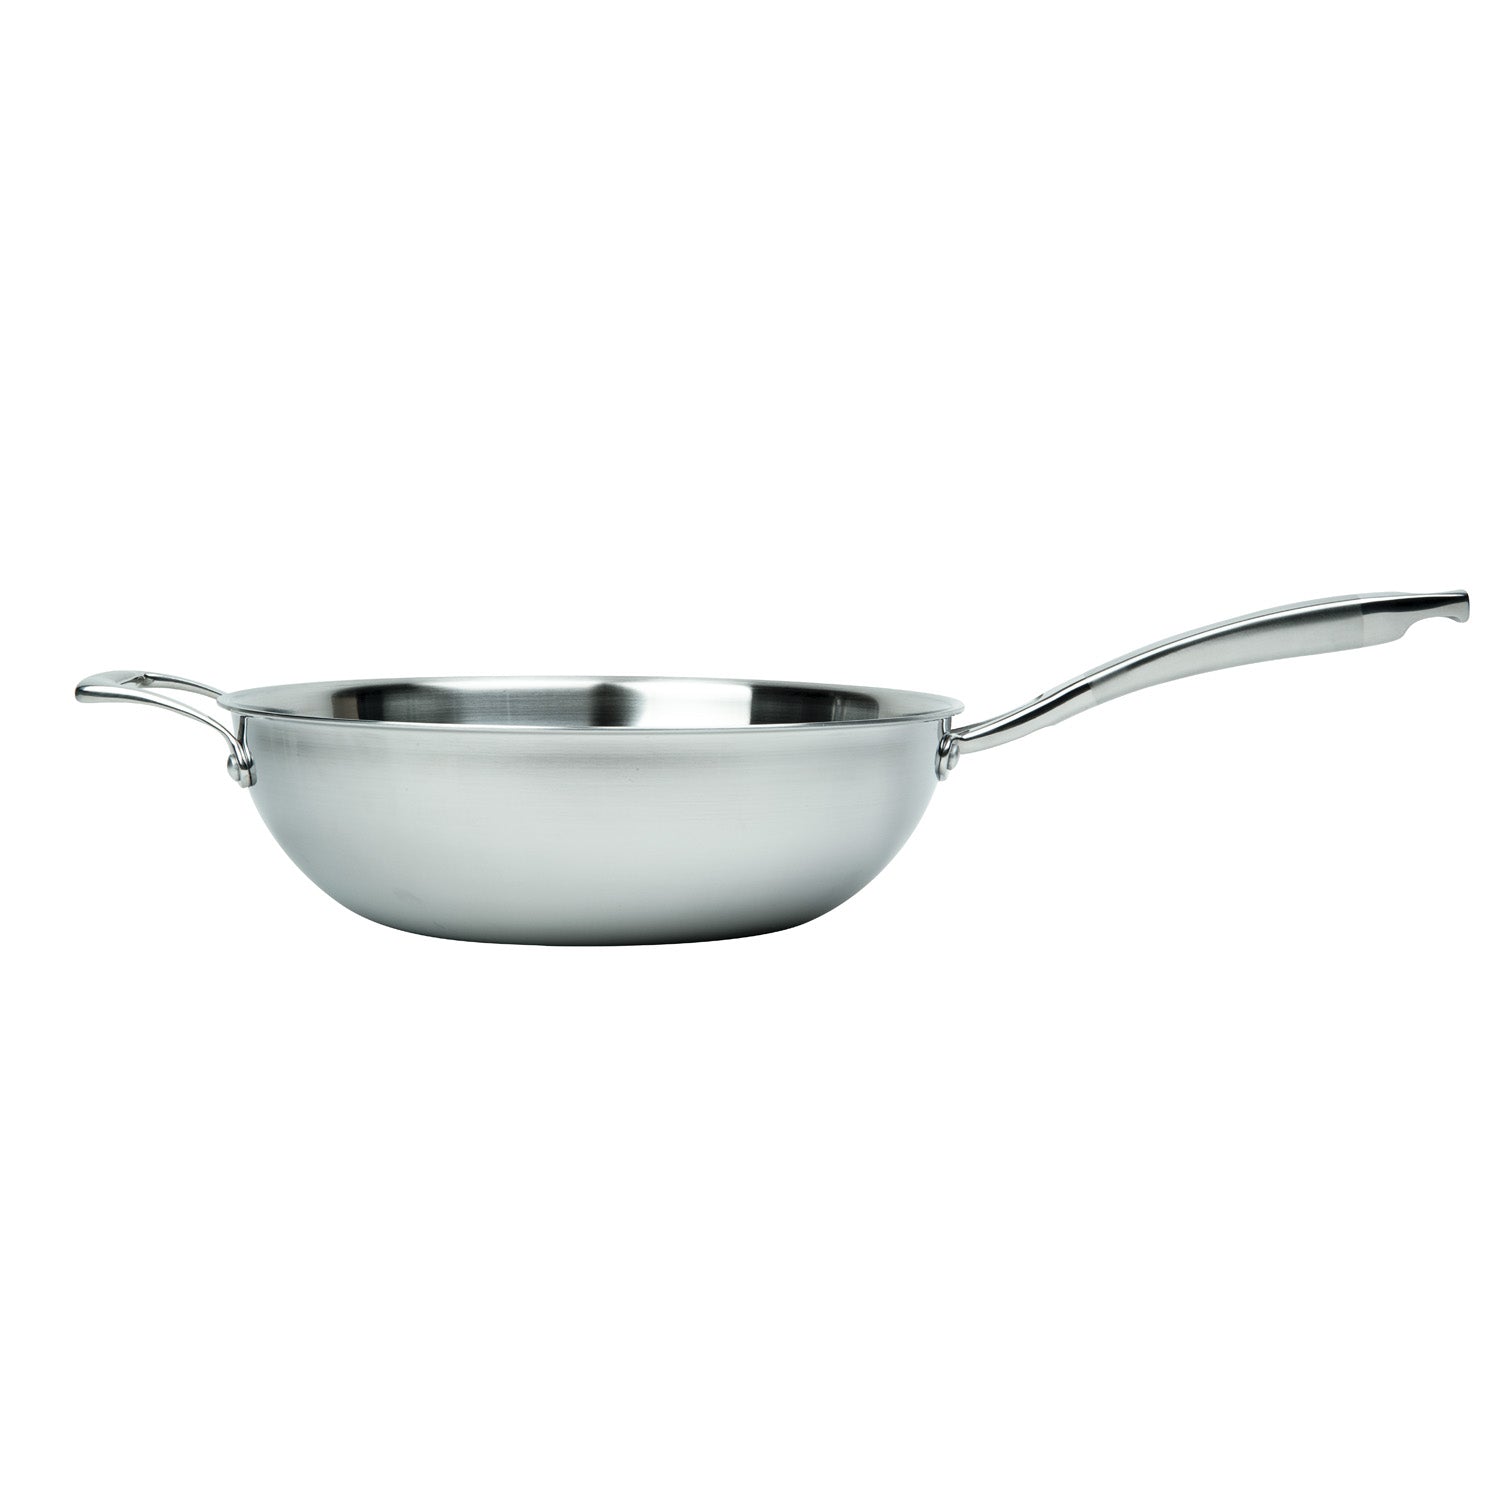 Products CHEF'S WOK & GLASS LID, 3-PLY STAINLESS STEEL & ALUMINUM SCRATCH-RESISTANT, 12